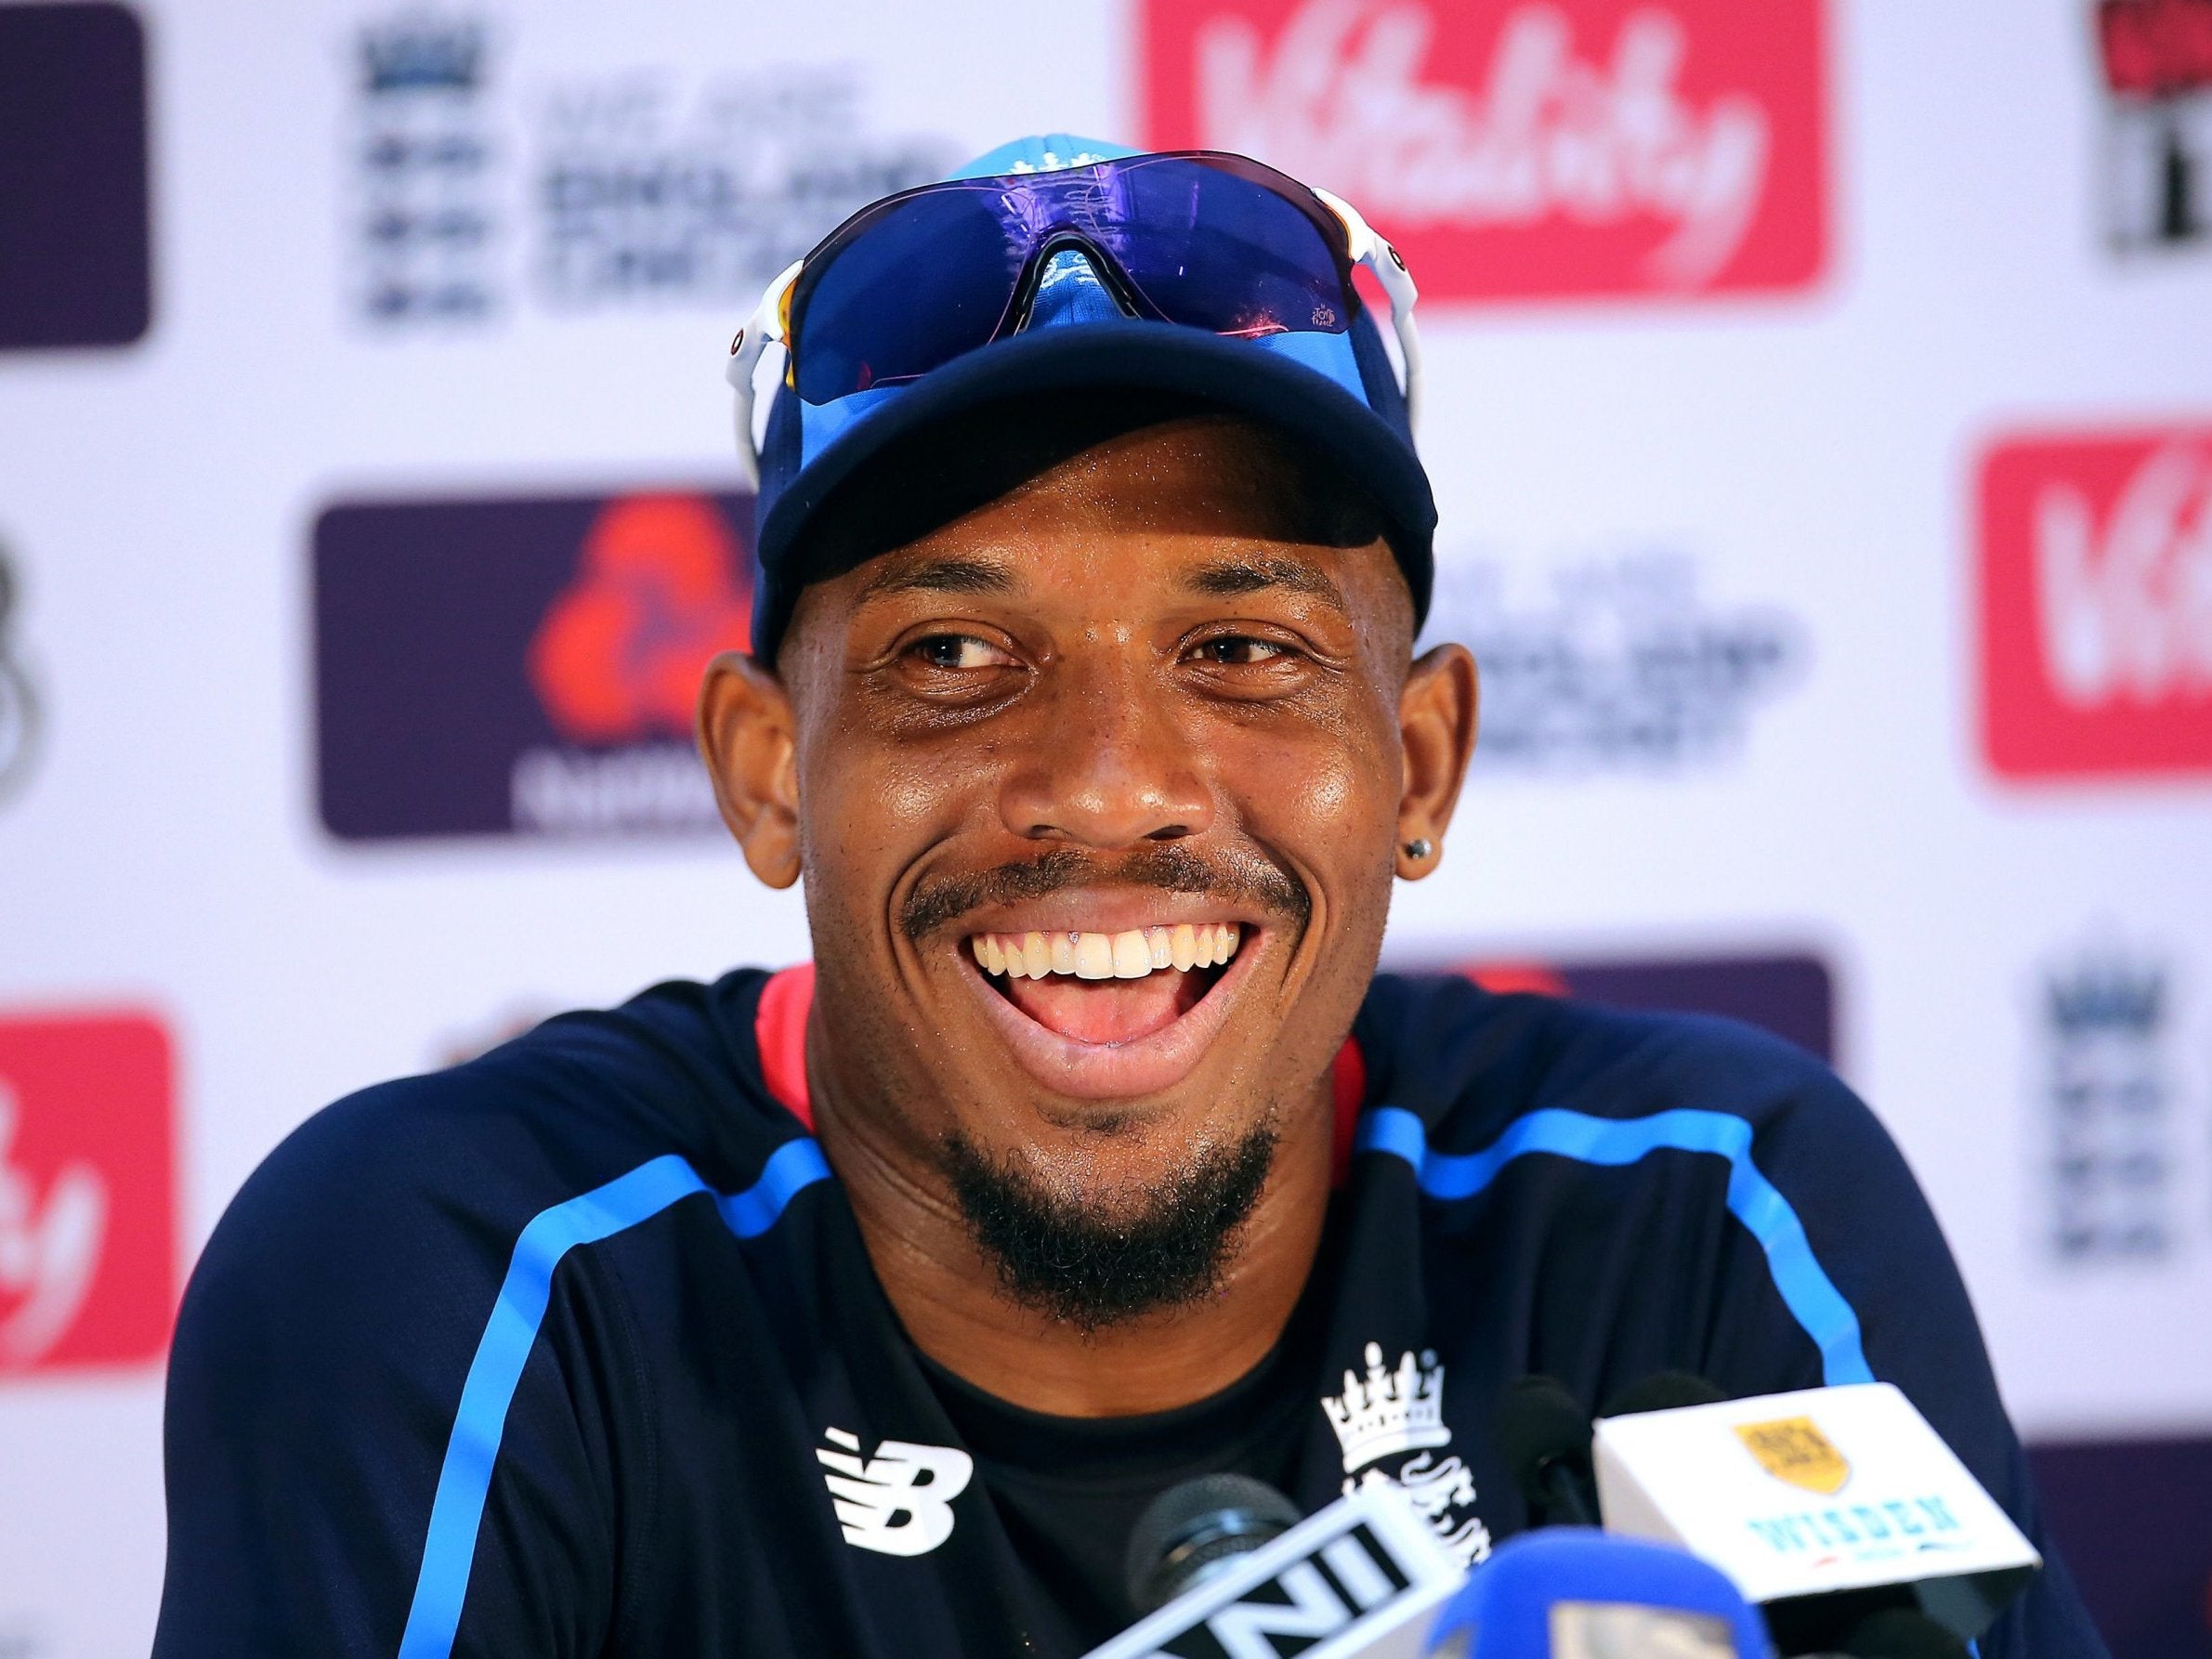 Cricket World Cup: Chris Jordan wants 'little brother' Jofra Archer in squad - but also wants own place | The | The Independent